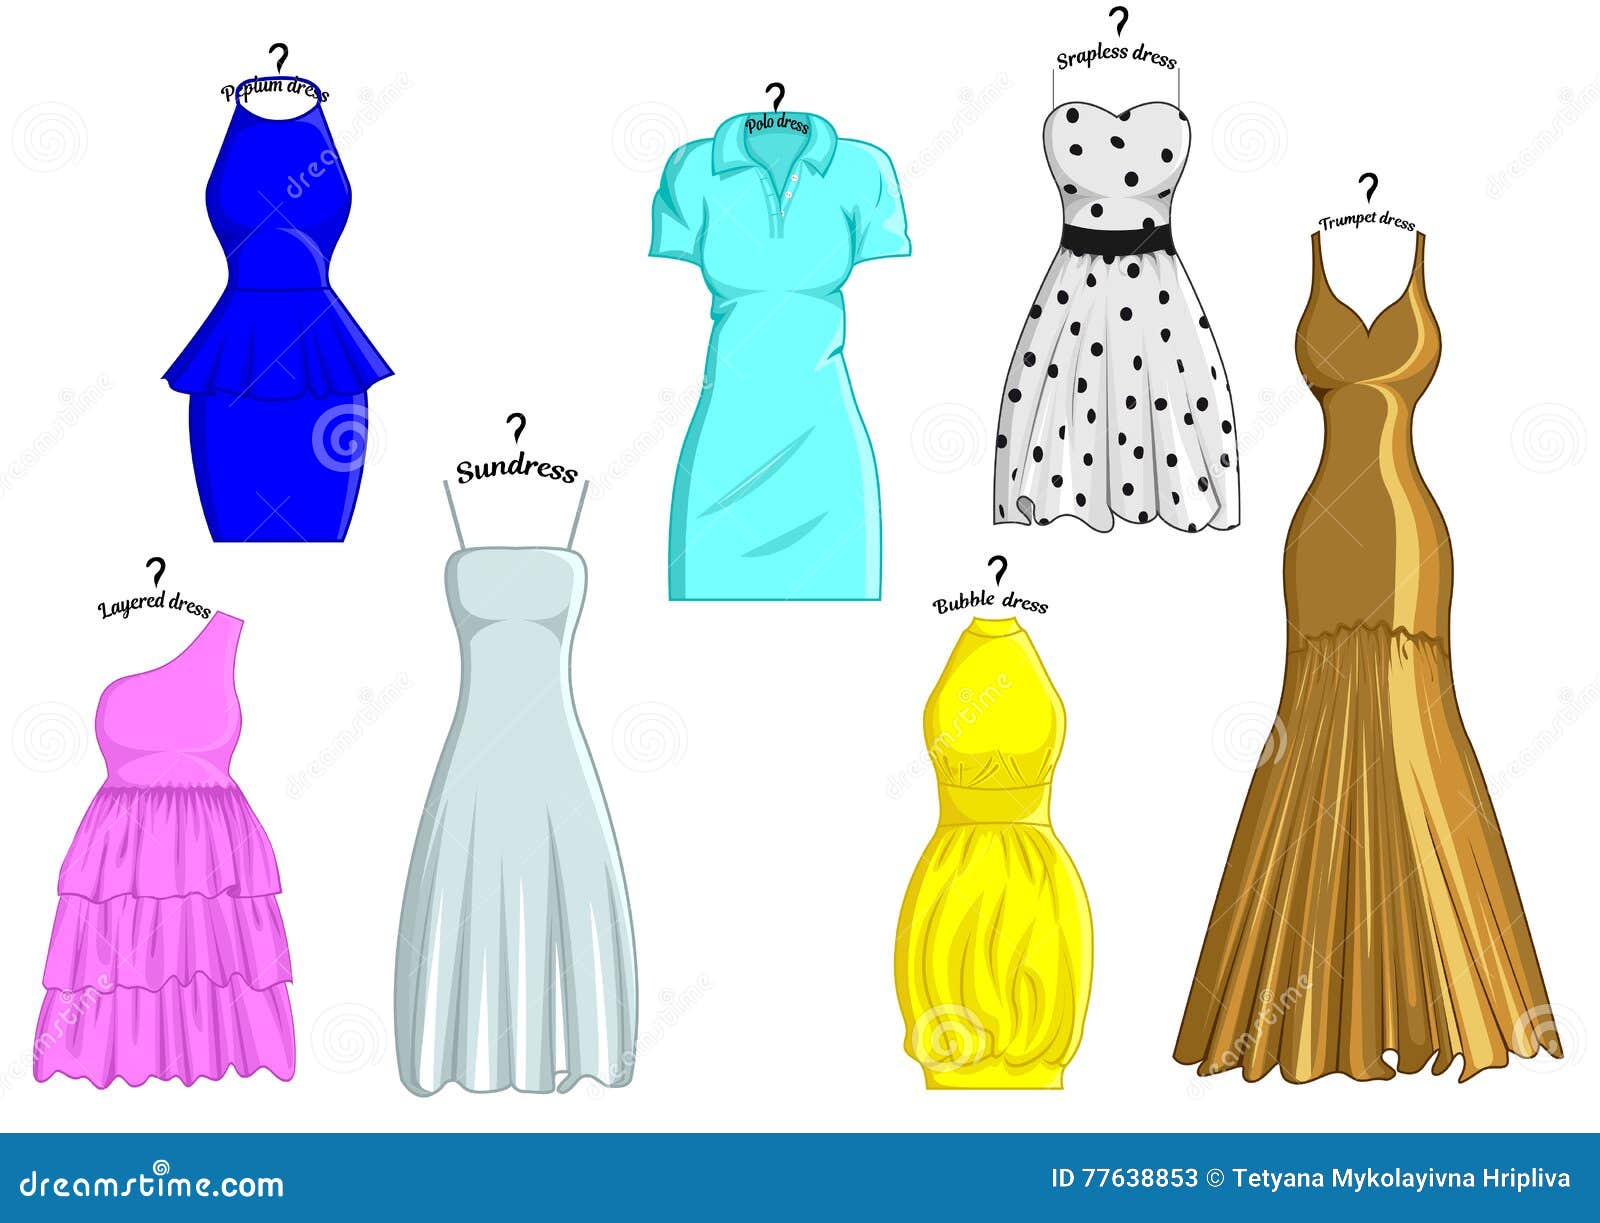 Styles of dresses stock vector. Illustration of people - 77638853